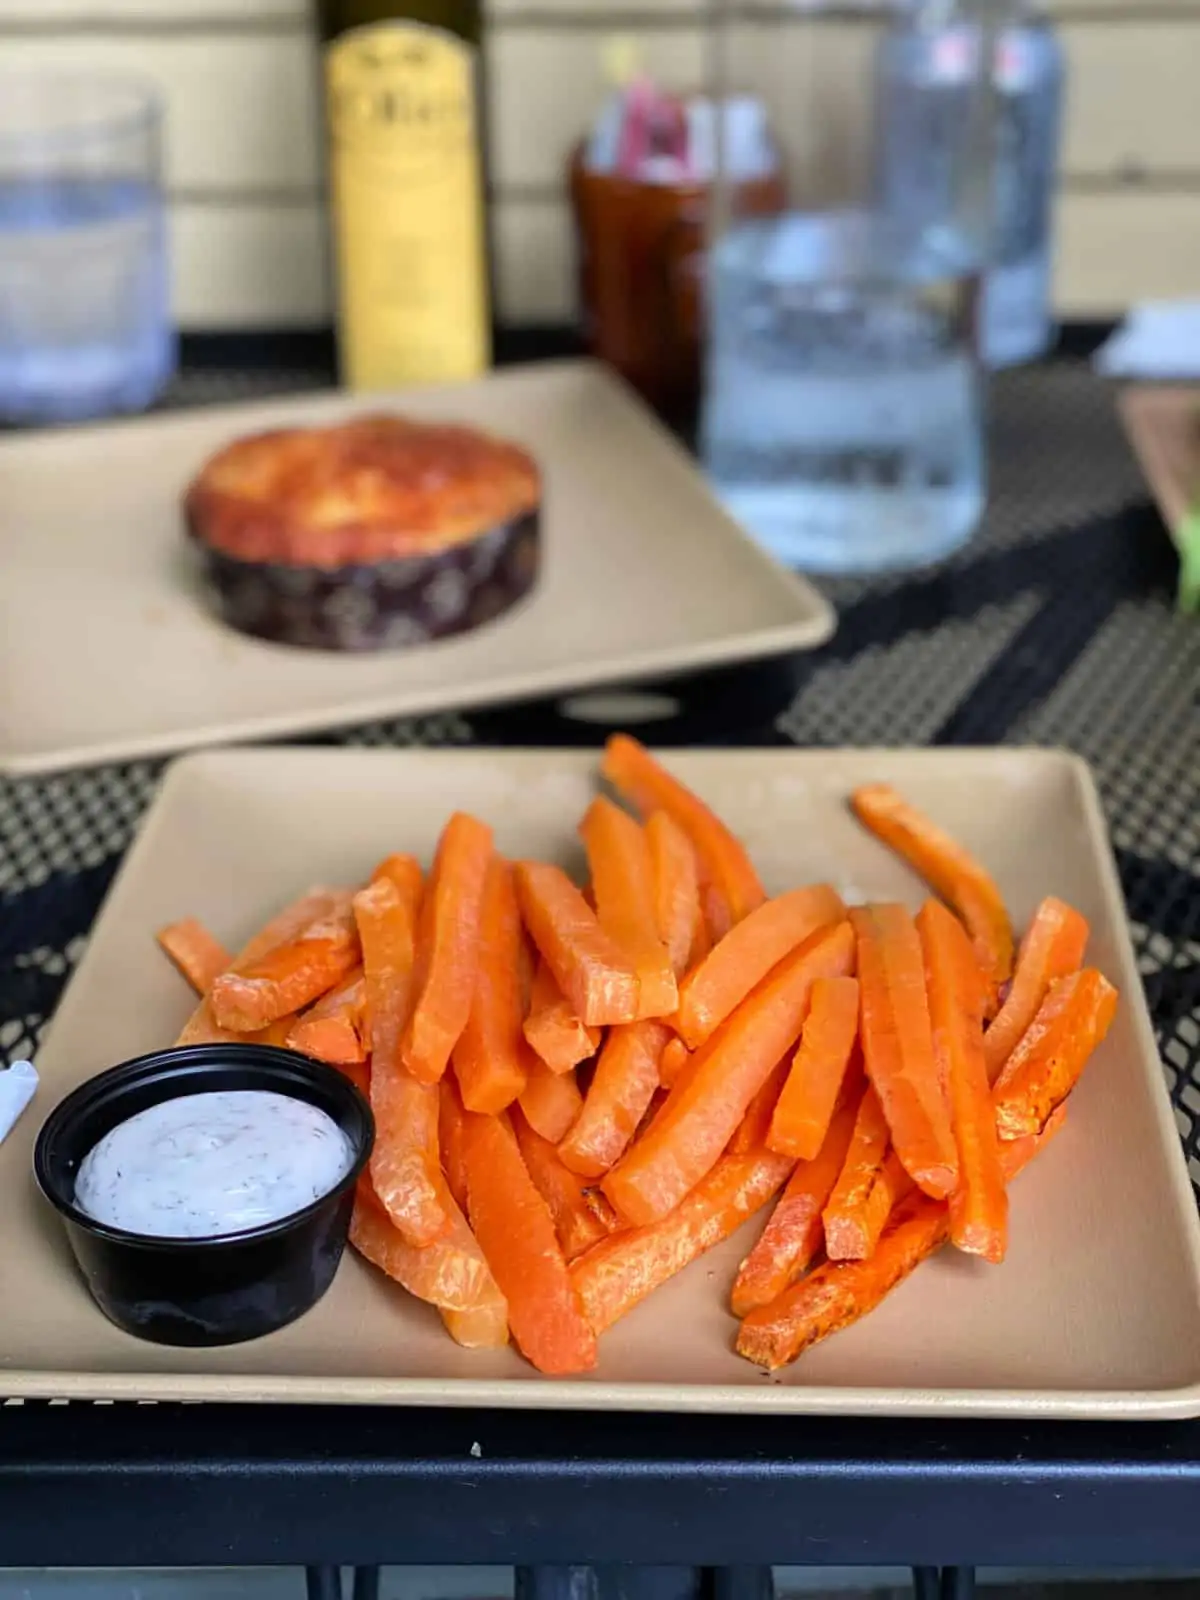 Plate of carrot fries with dipping sauce on a table.